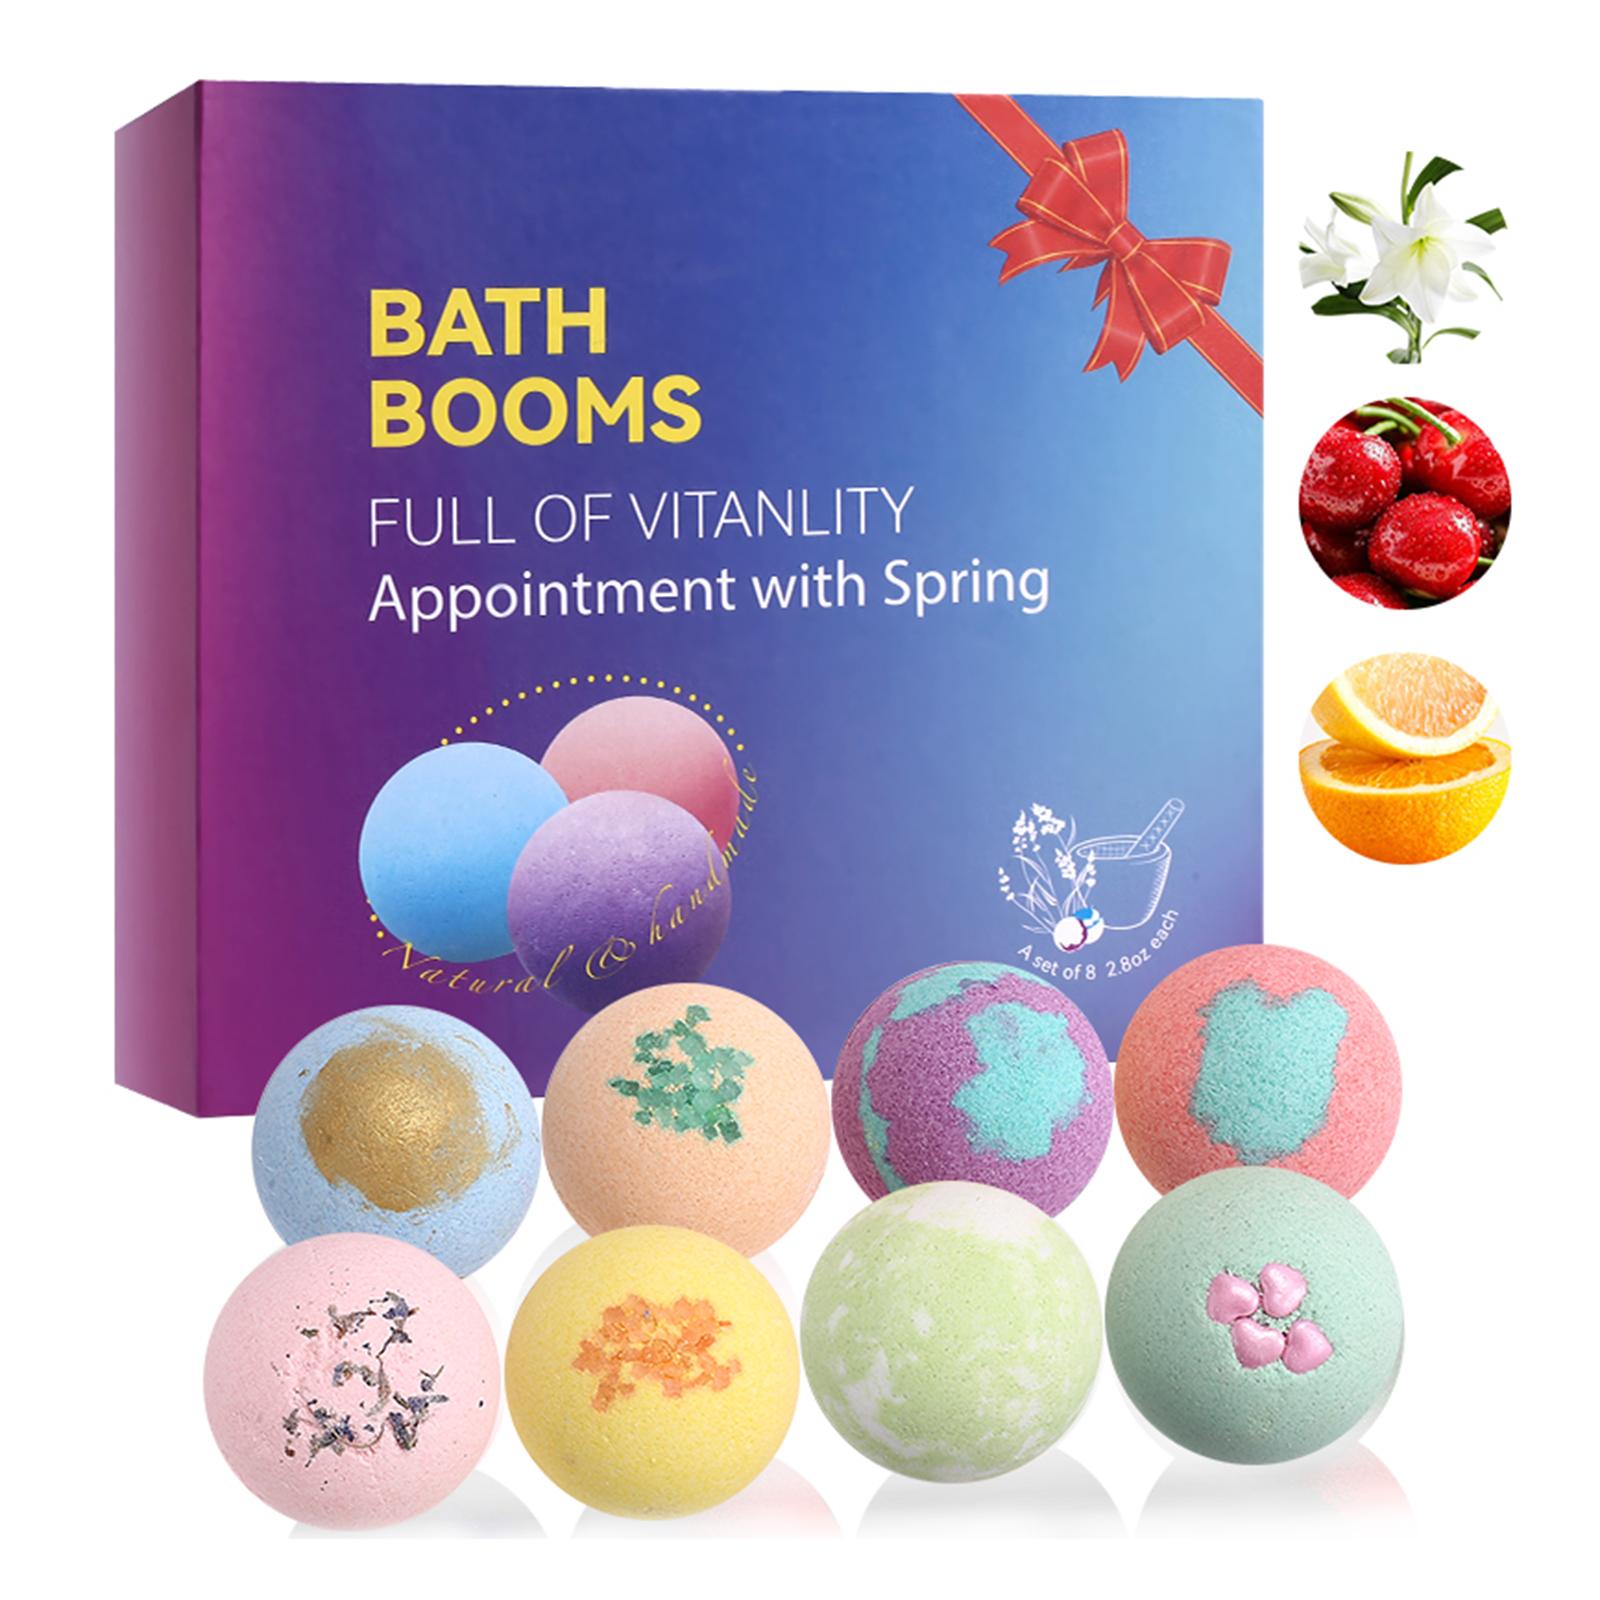 8PCS Aromatherapy Bath Bombs Scented Shower Bath Salt Ball Stress Relief & Relaxation for Valentine's Day/Birthday Gift